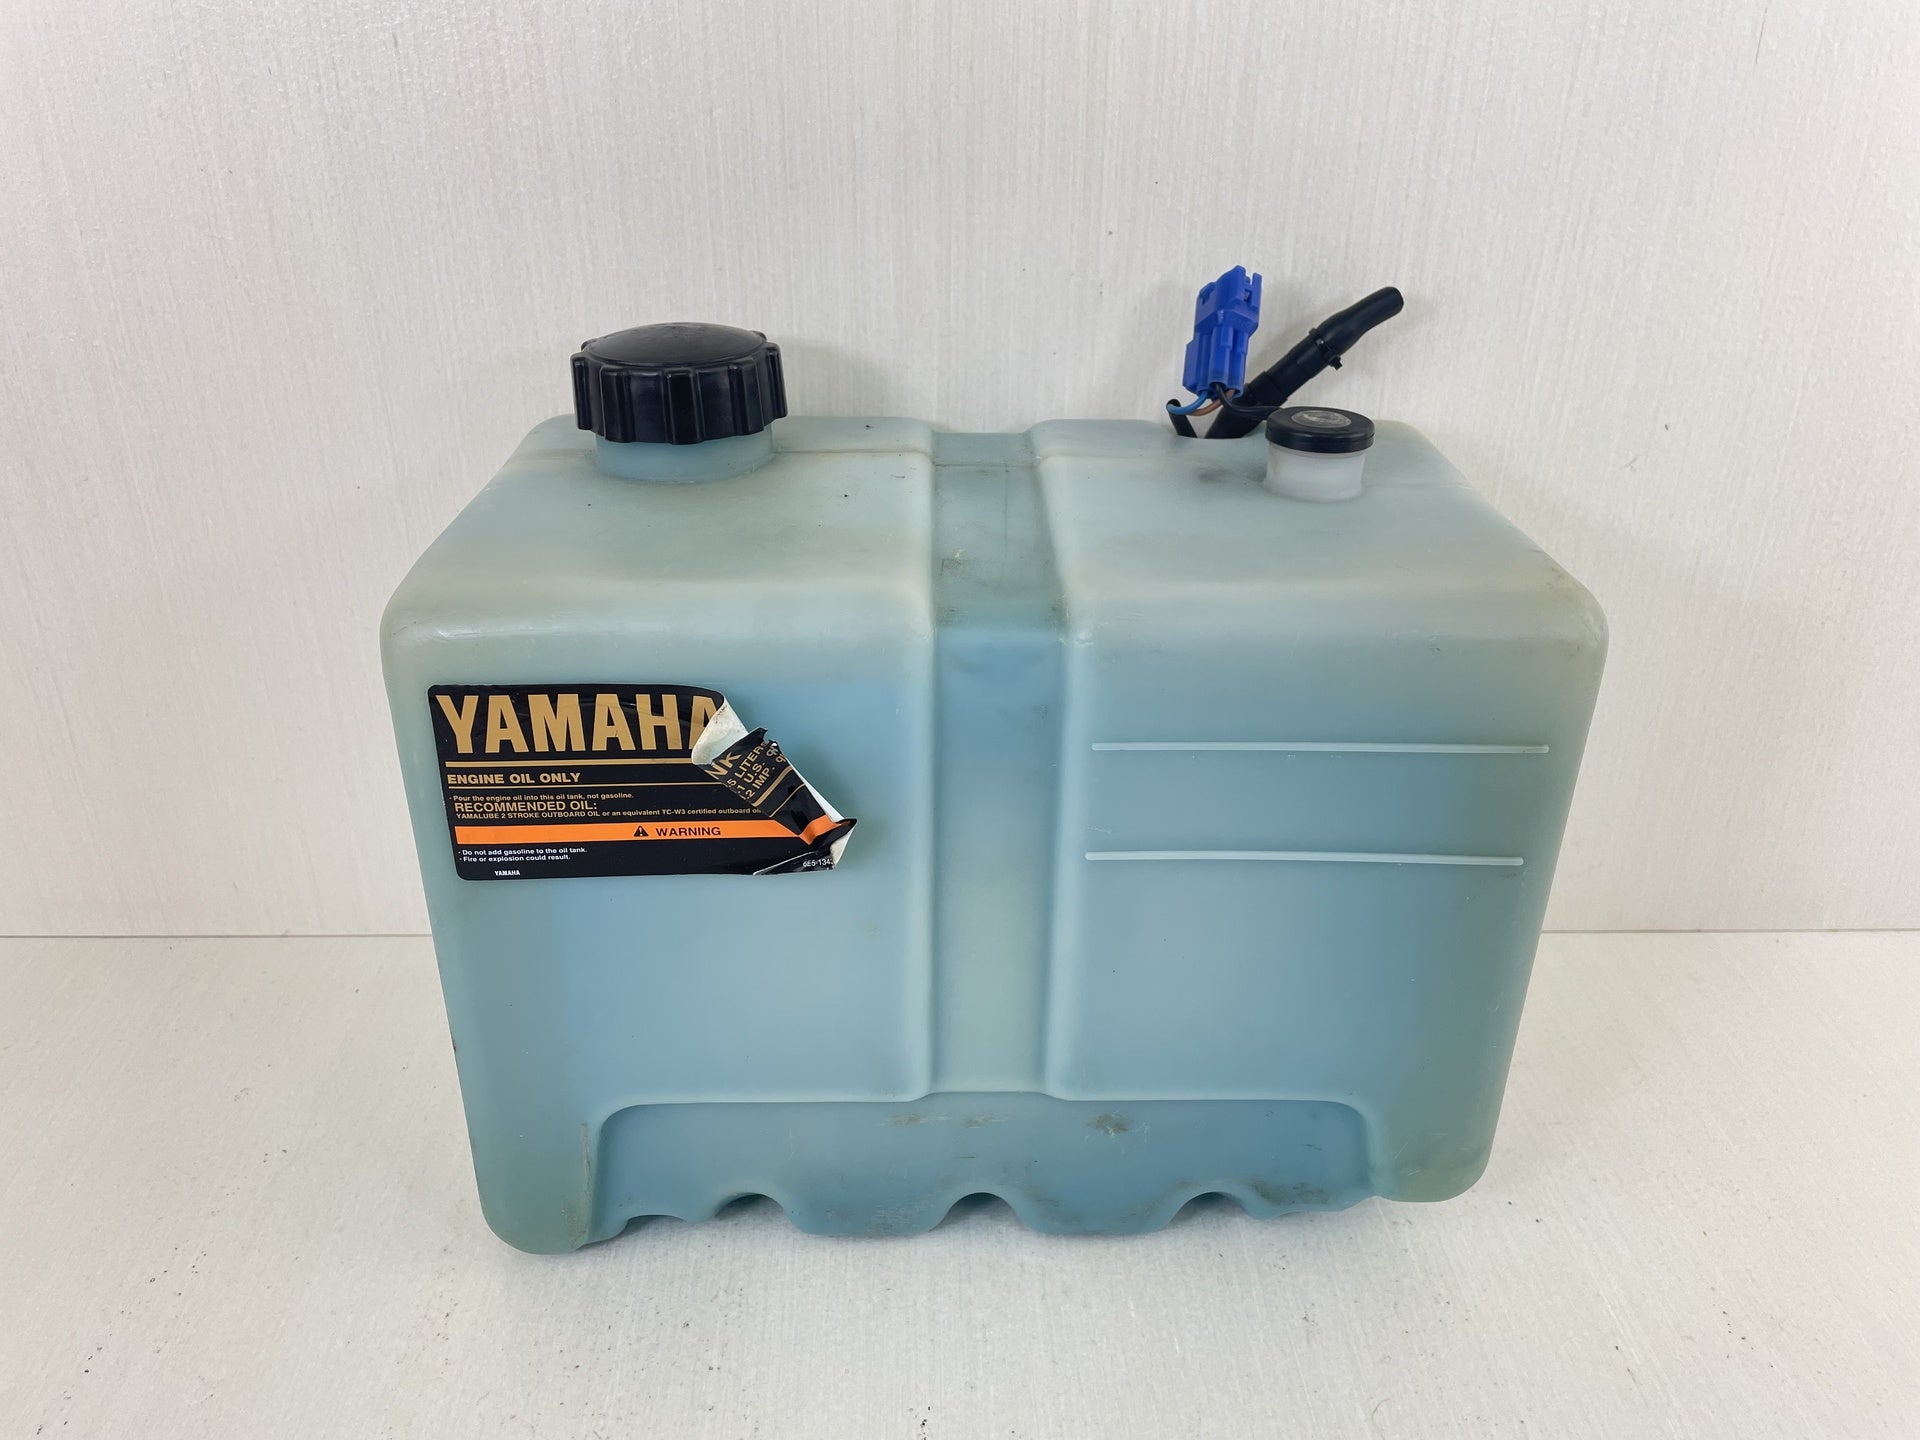 Yamaha Outboard Remote 2 Stroke Oil Tank Assembly With Pump 2.8 Gallons